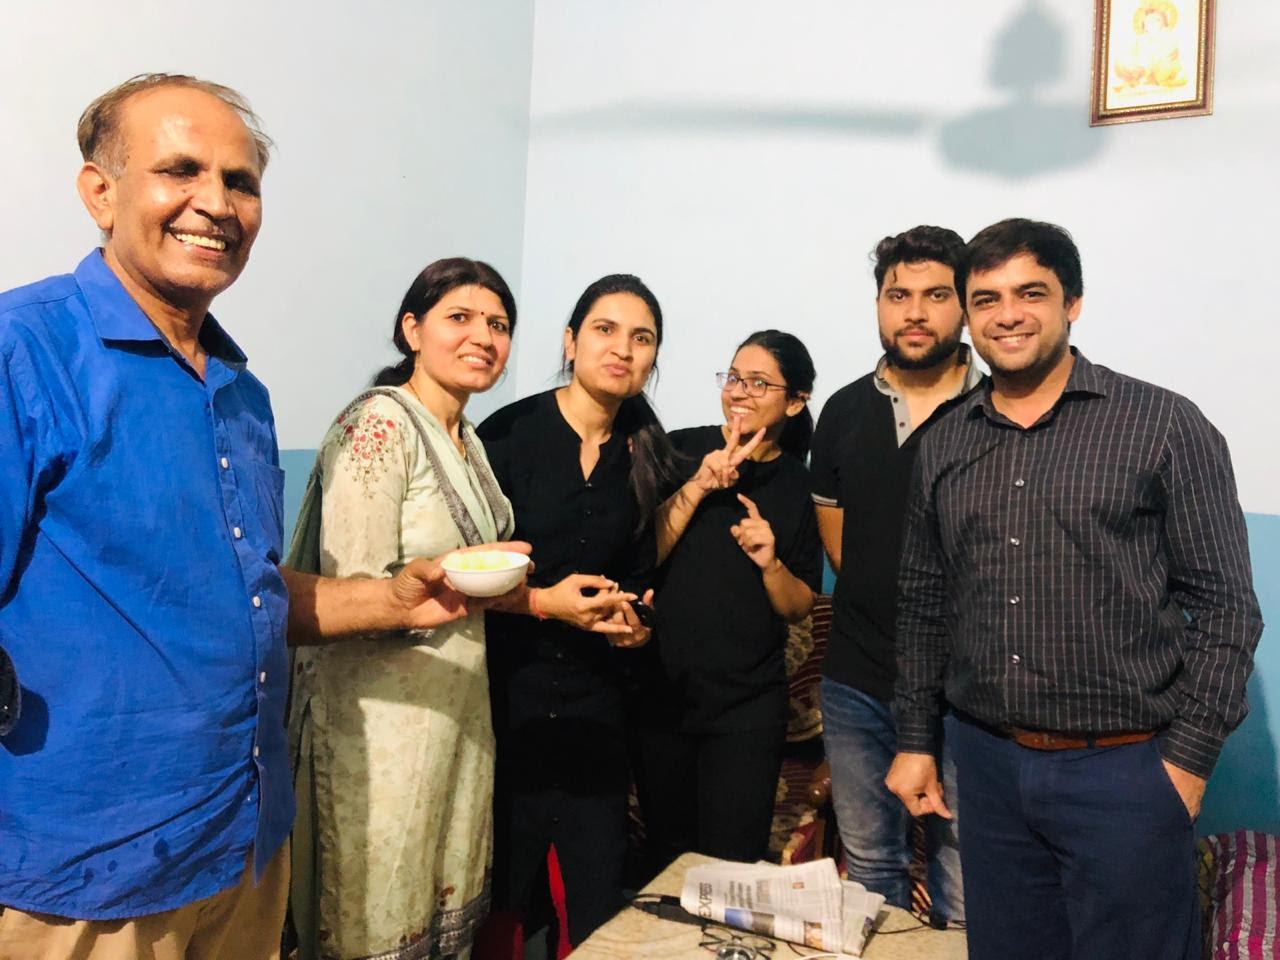 IAS Nidhi Siwach with her family after the UPSC results.